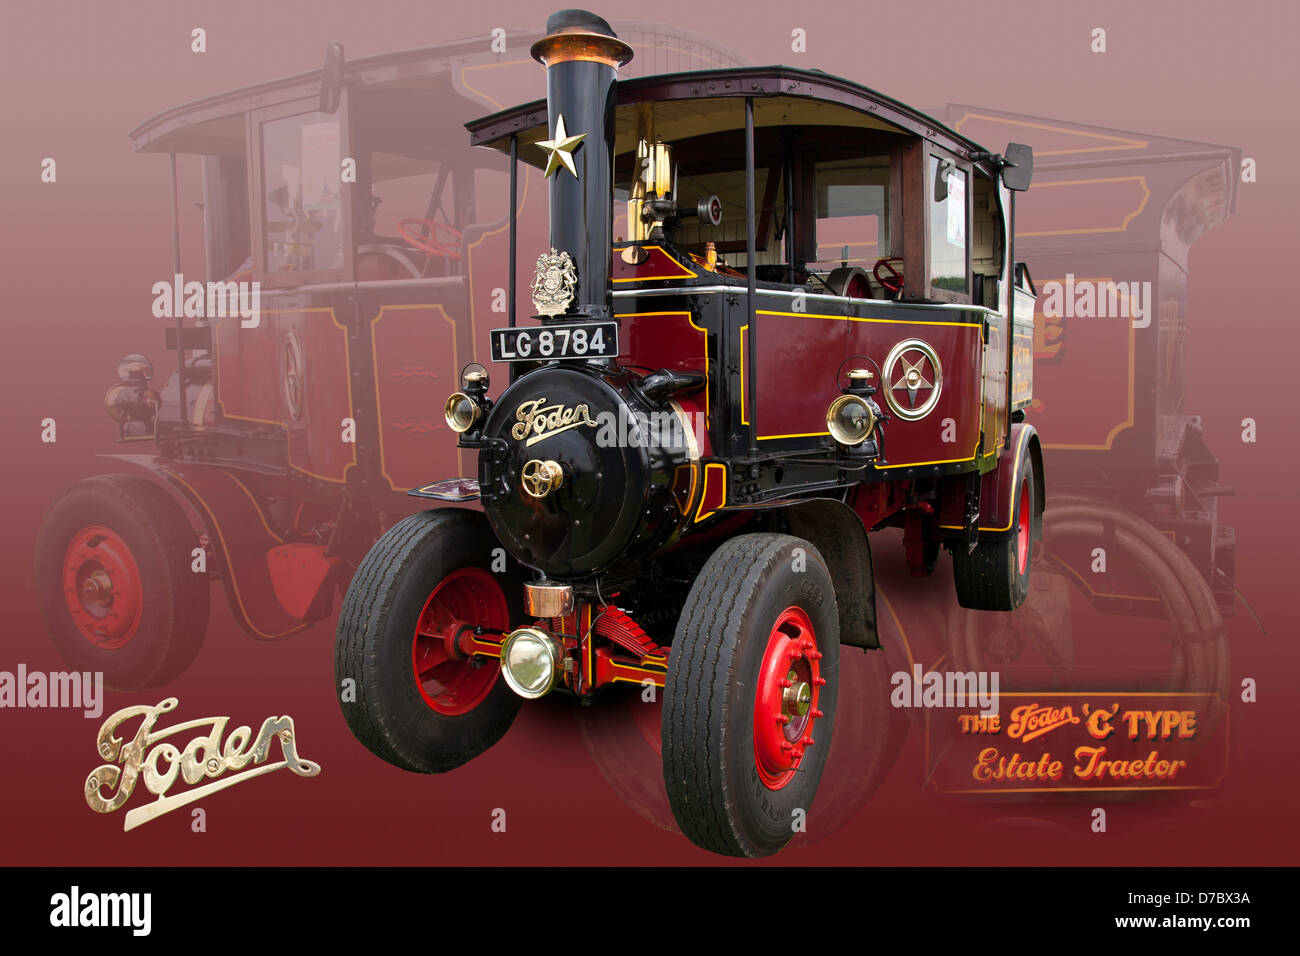 Foden 'C' Type Estate Tractor Stock Photo